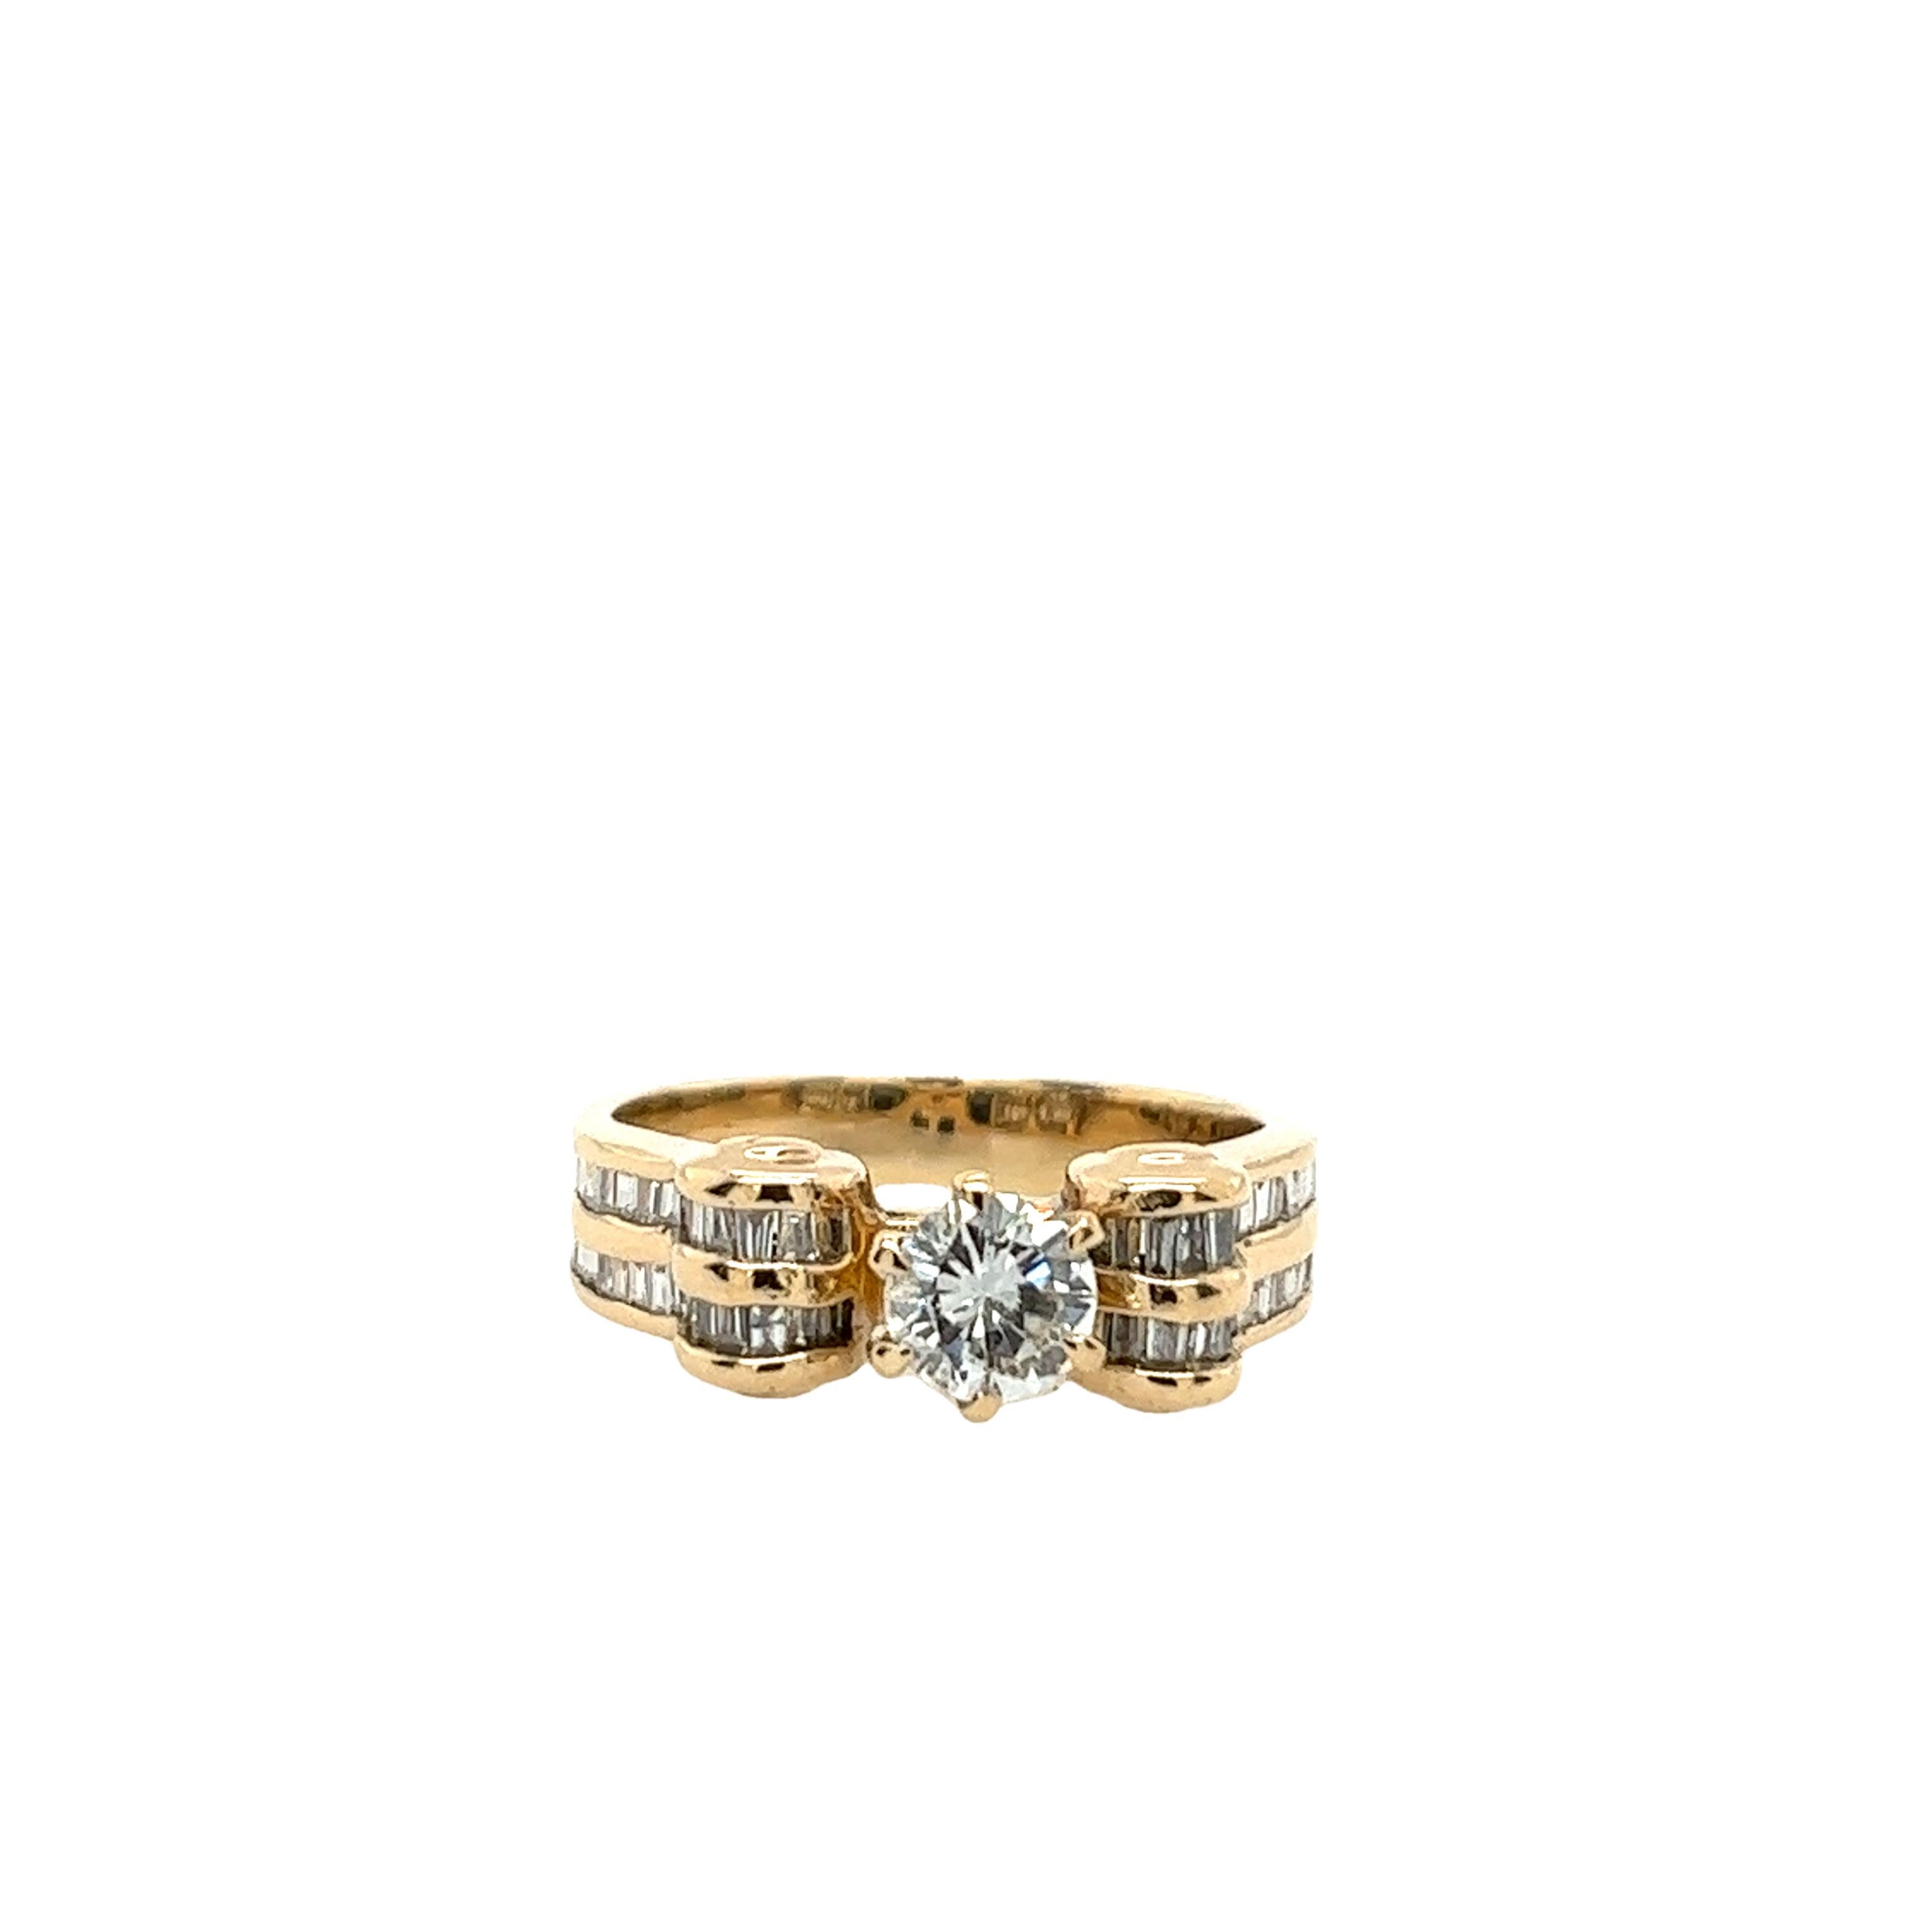 18ct Yellow Gold Diamond Solitaire Ring Set With 0.58ct Round Diamond & 0.43ct For Sale 4